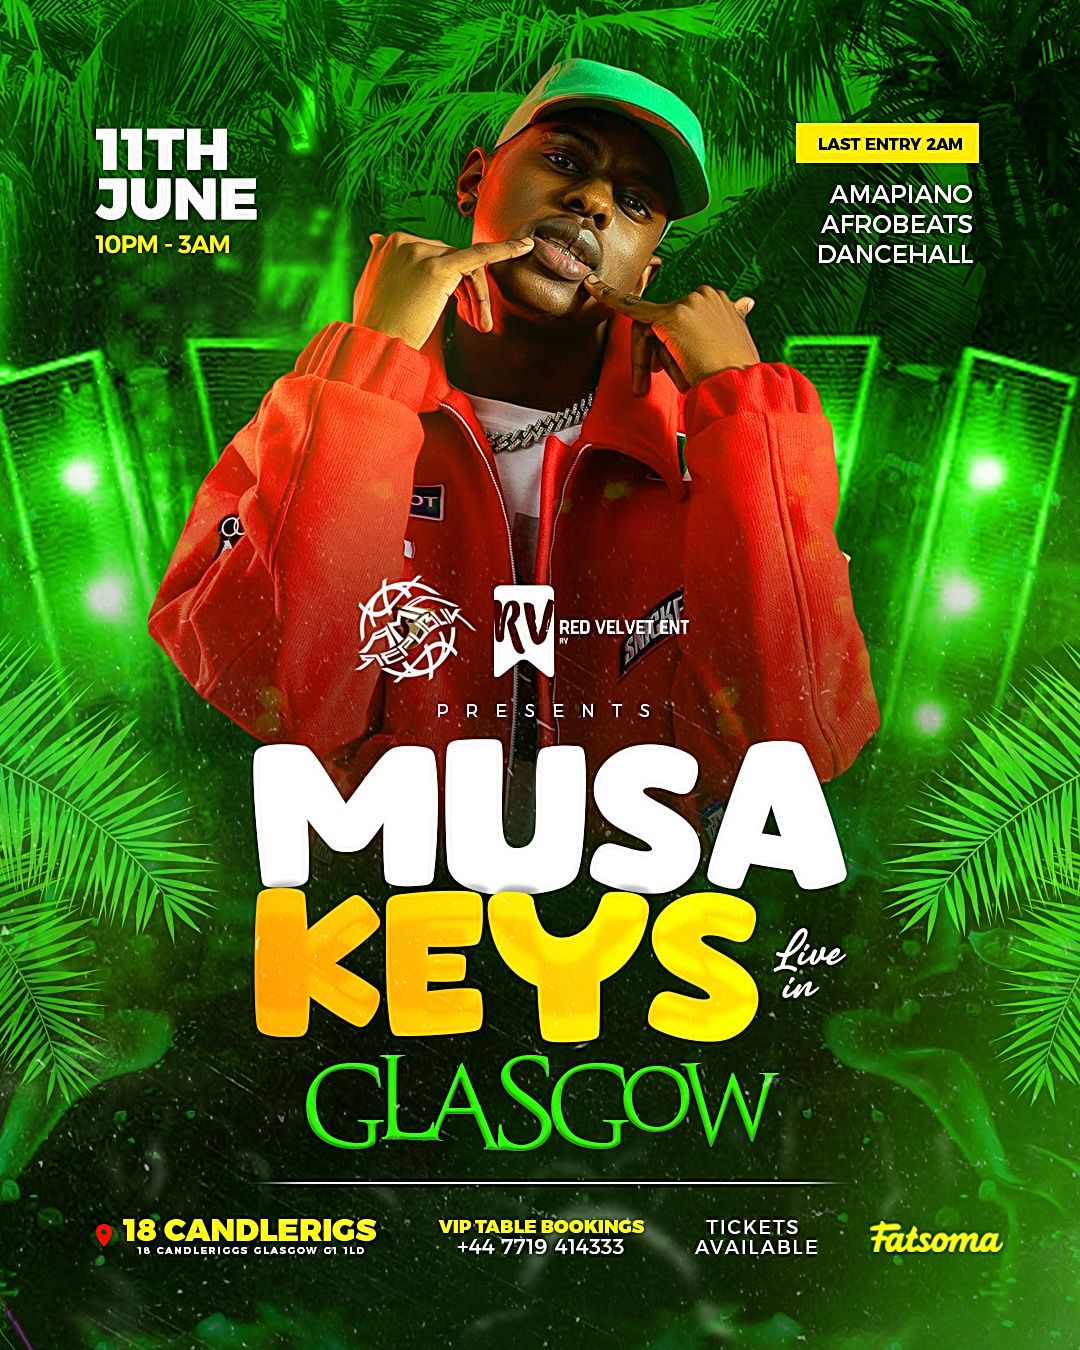 MUSA KEYS LIVE IN GLASGOW at 18 Candleriggs , Glasgow on 11th Jun 2022